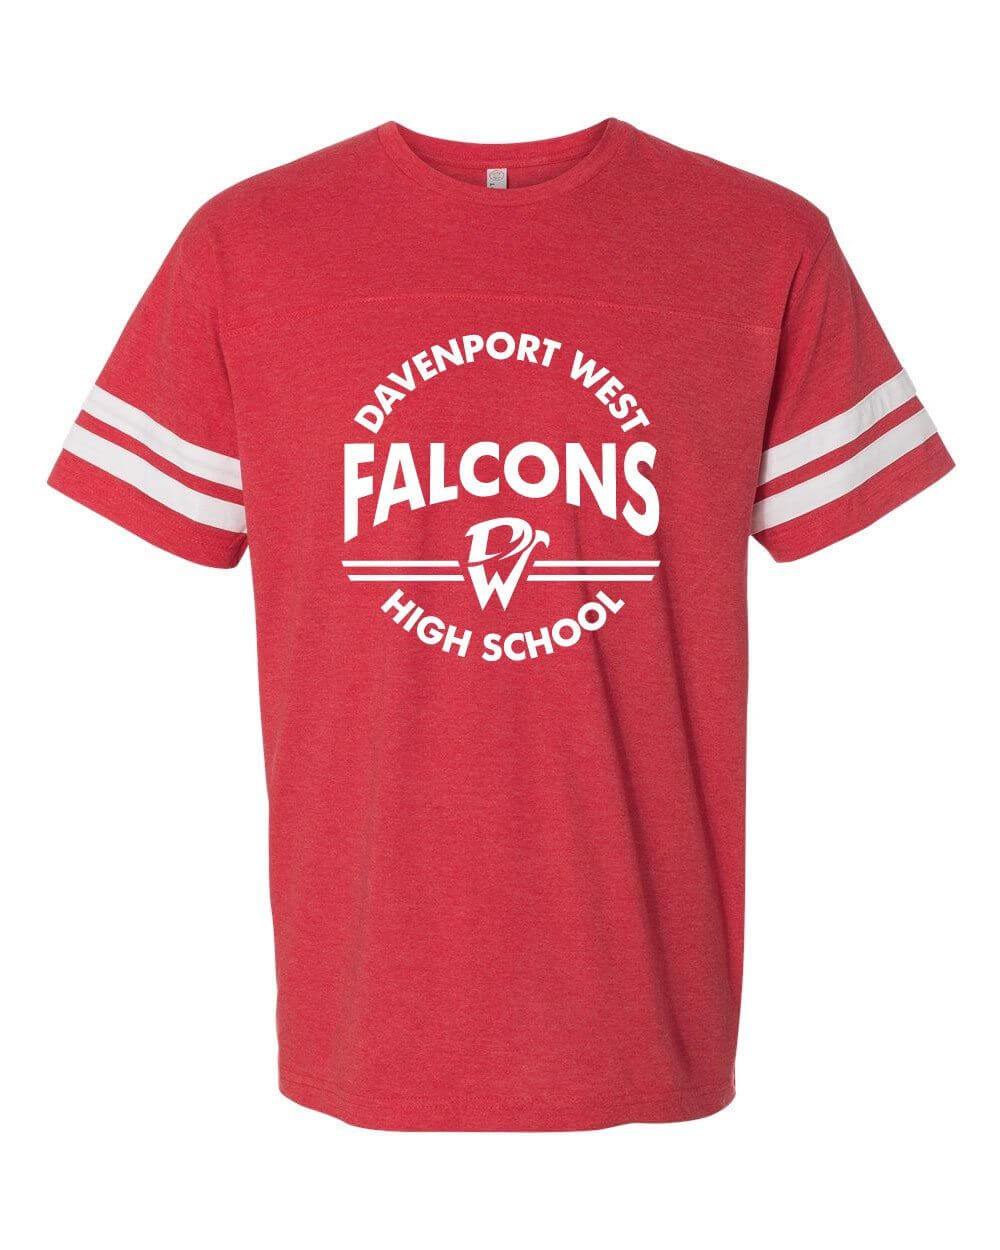 Davenport West Track and Field Varsity Tee